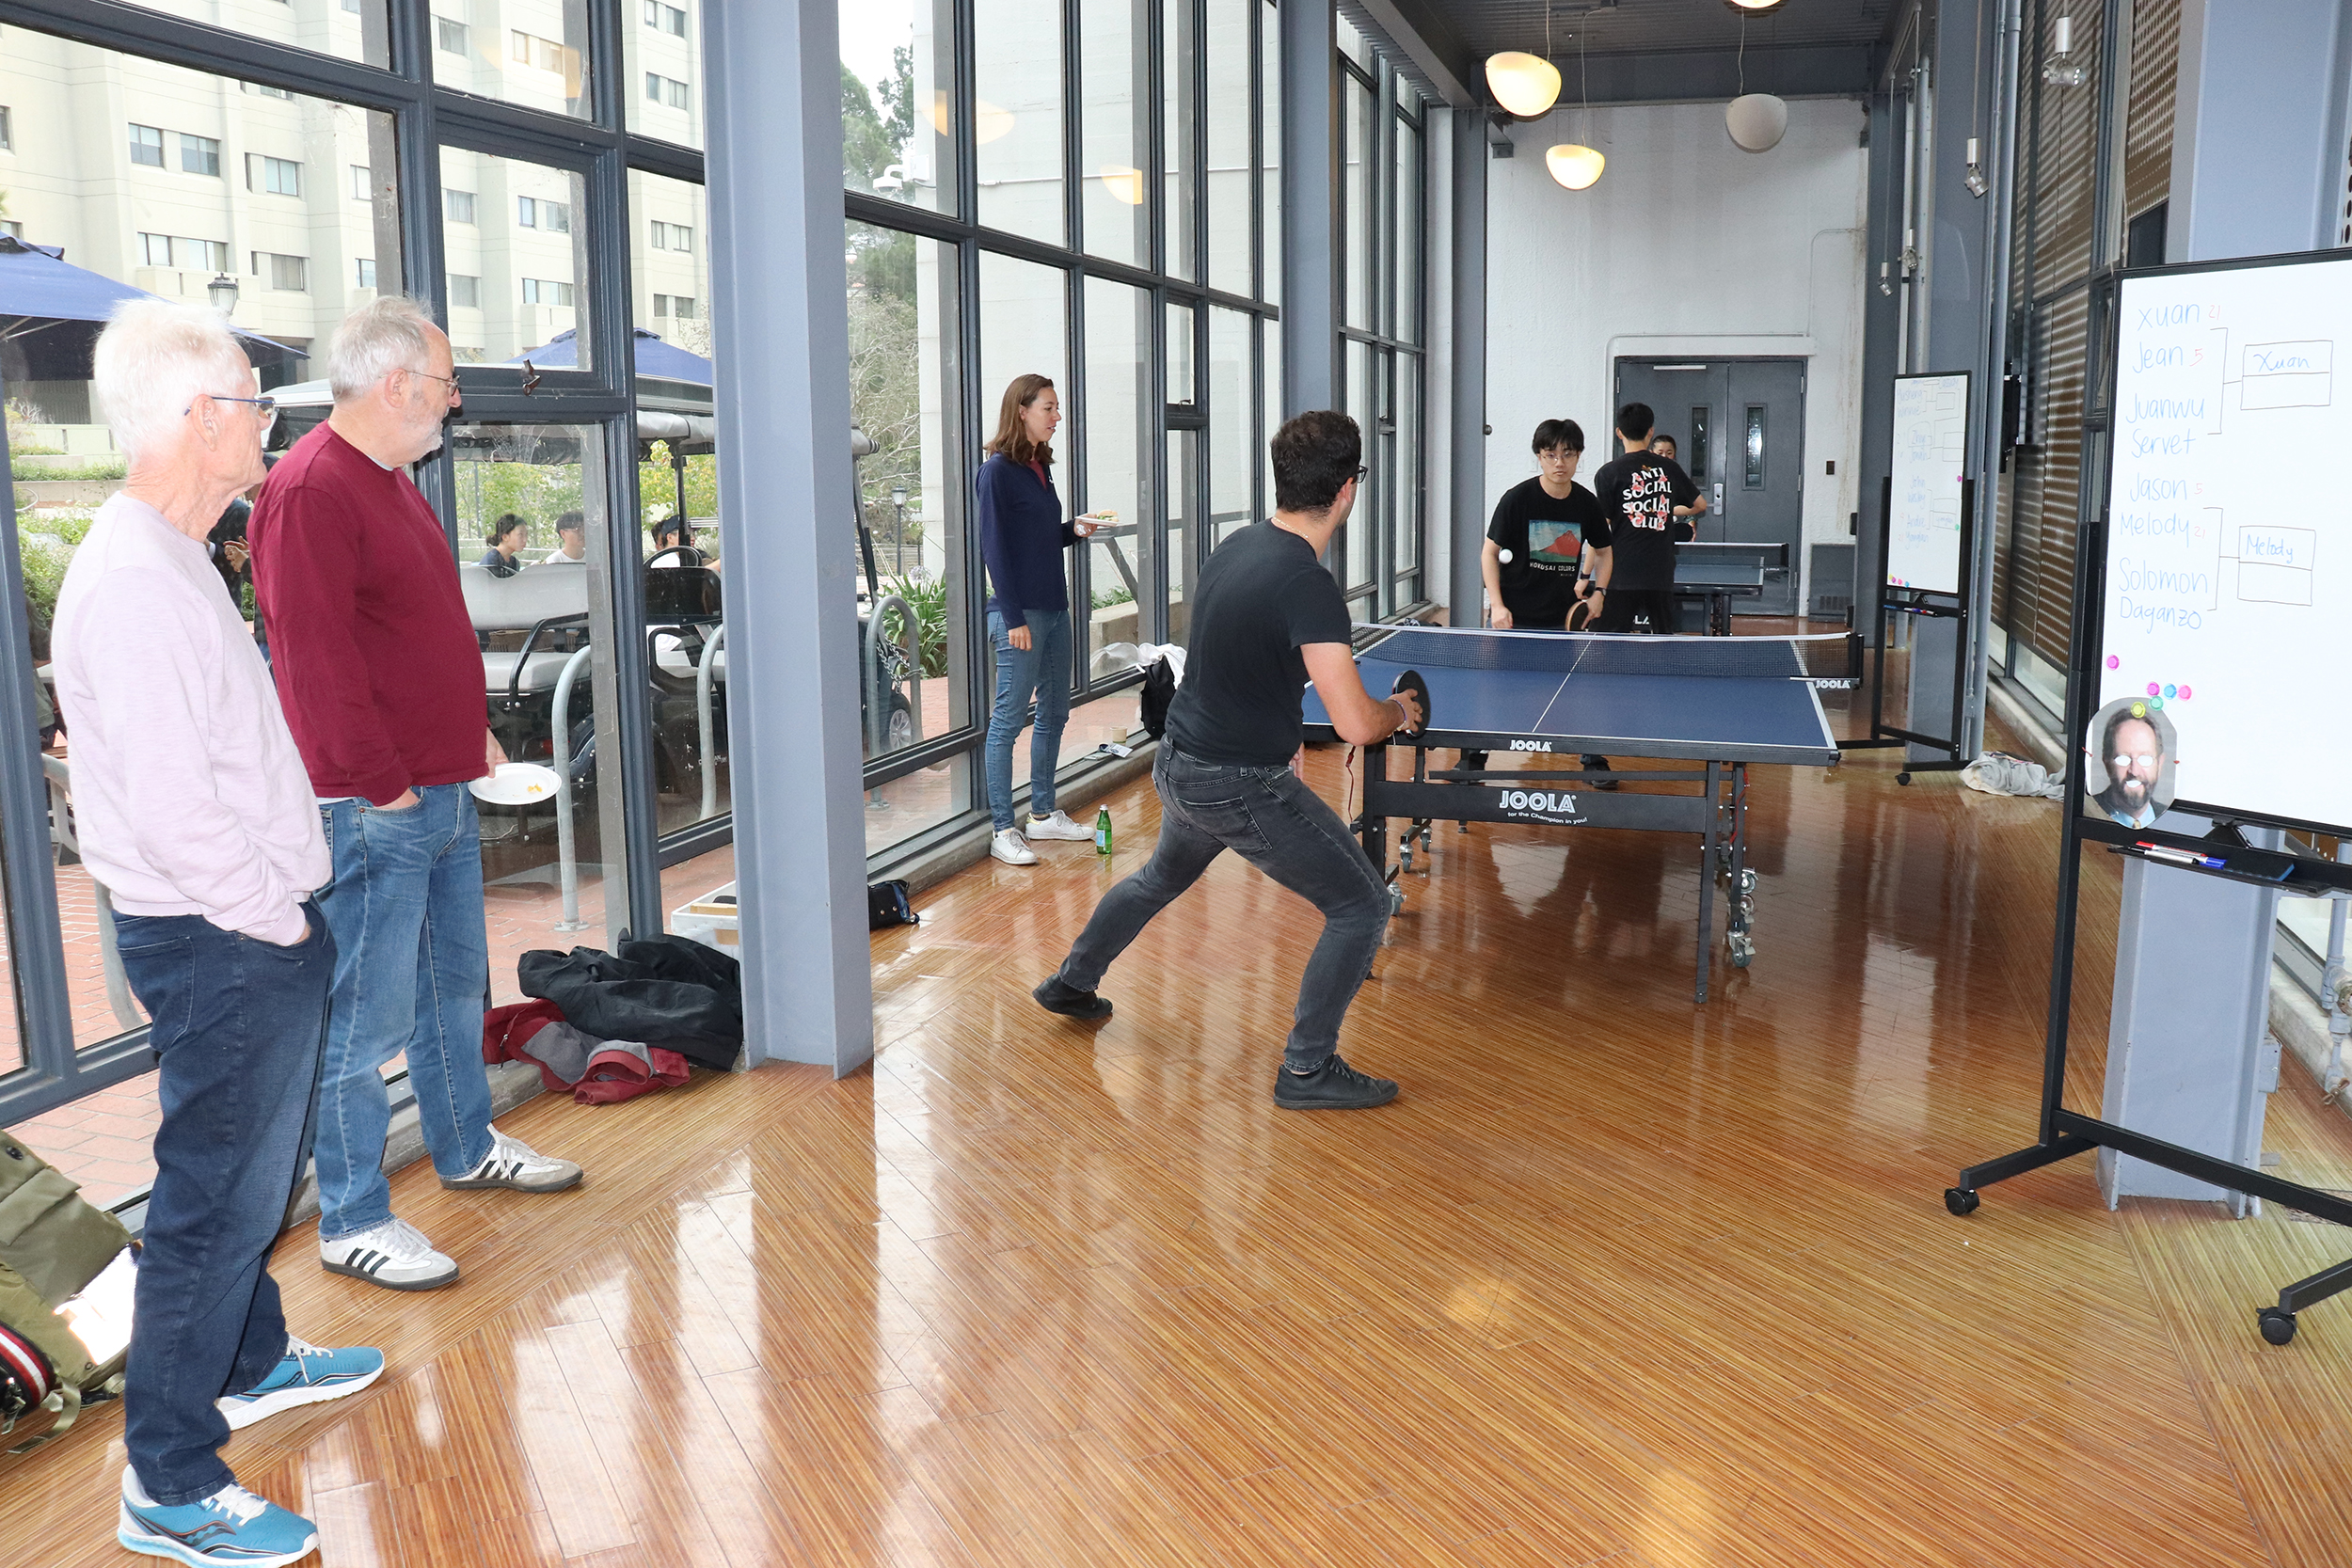 ITS @ 75 Ping pong tournament